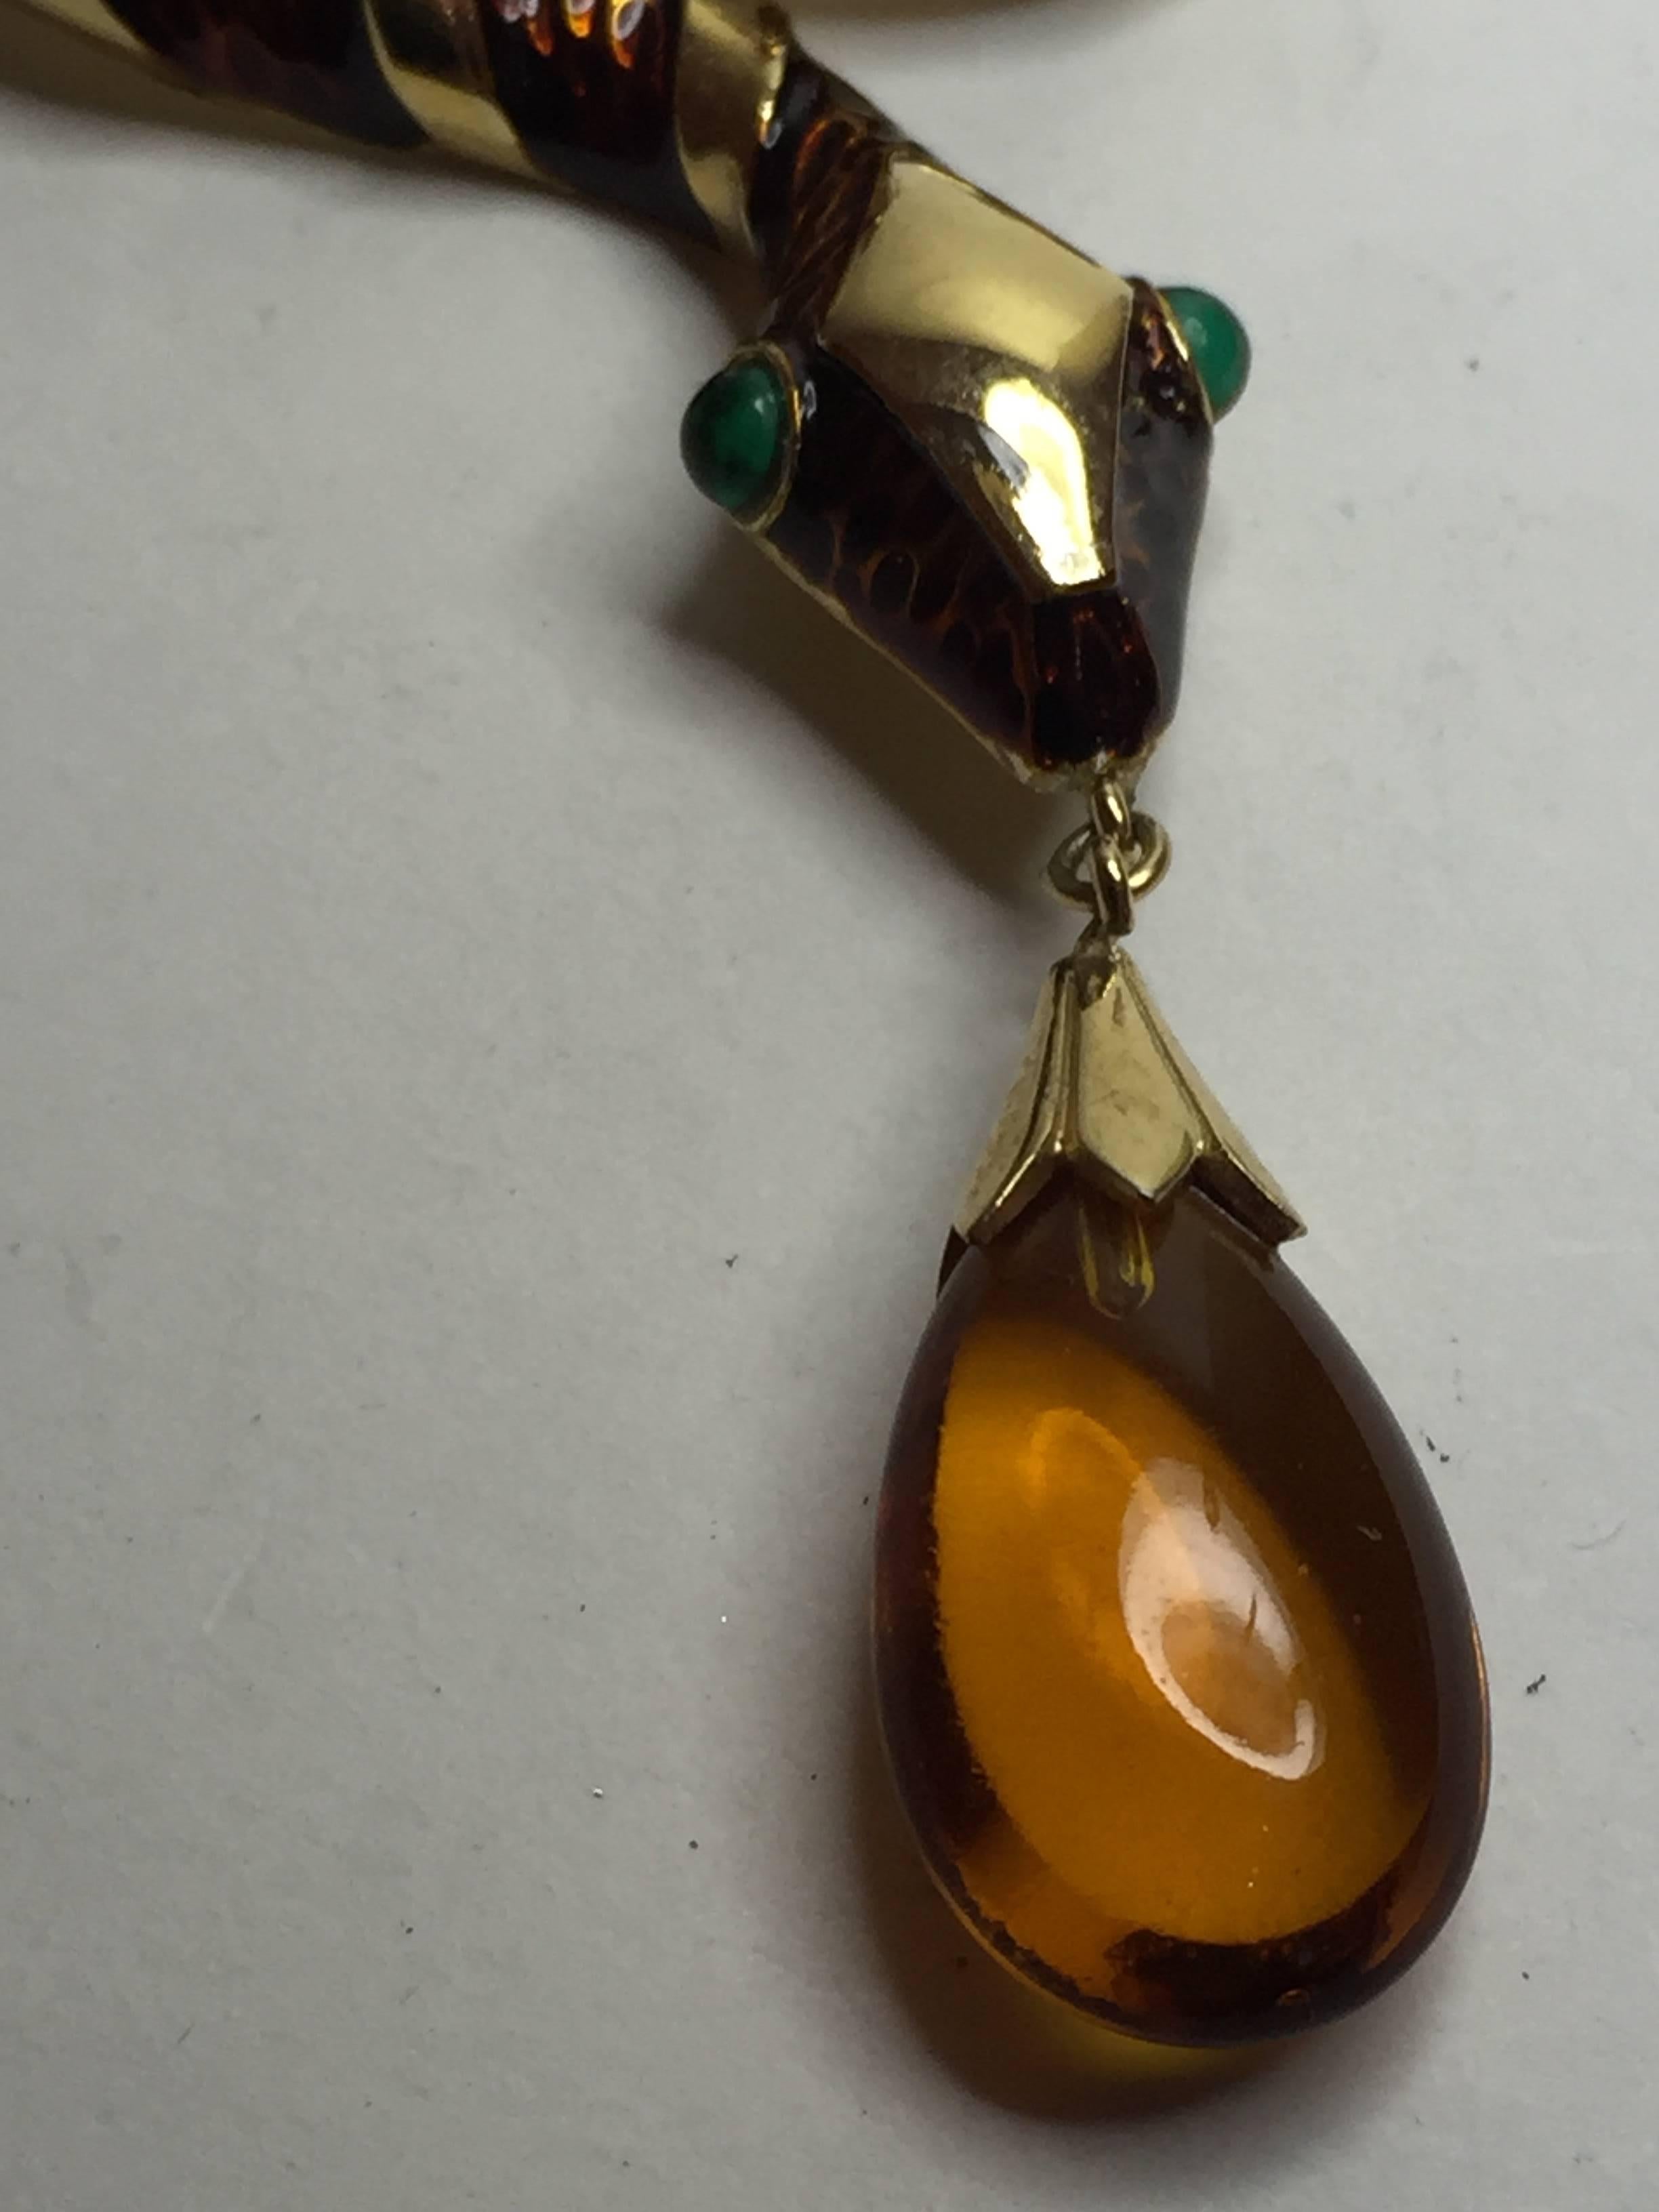 1960s TRIFARI Enamel & Goldtone Coiled Snake Brooch Pin with Amber Teardrop For Sale 2